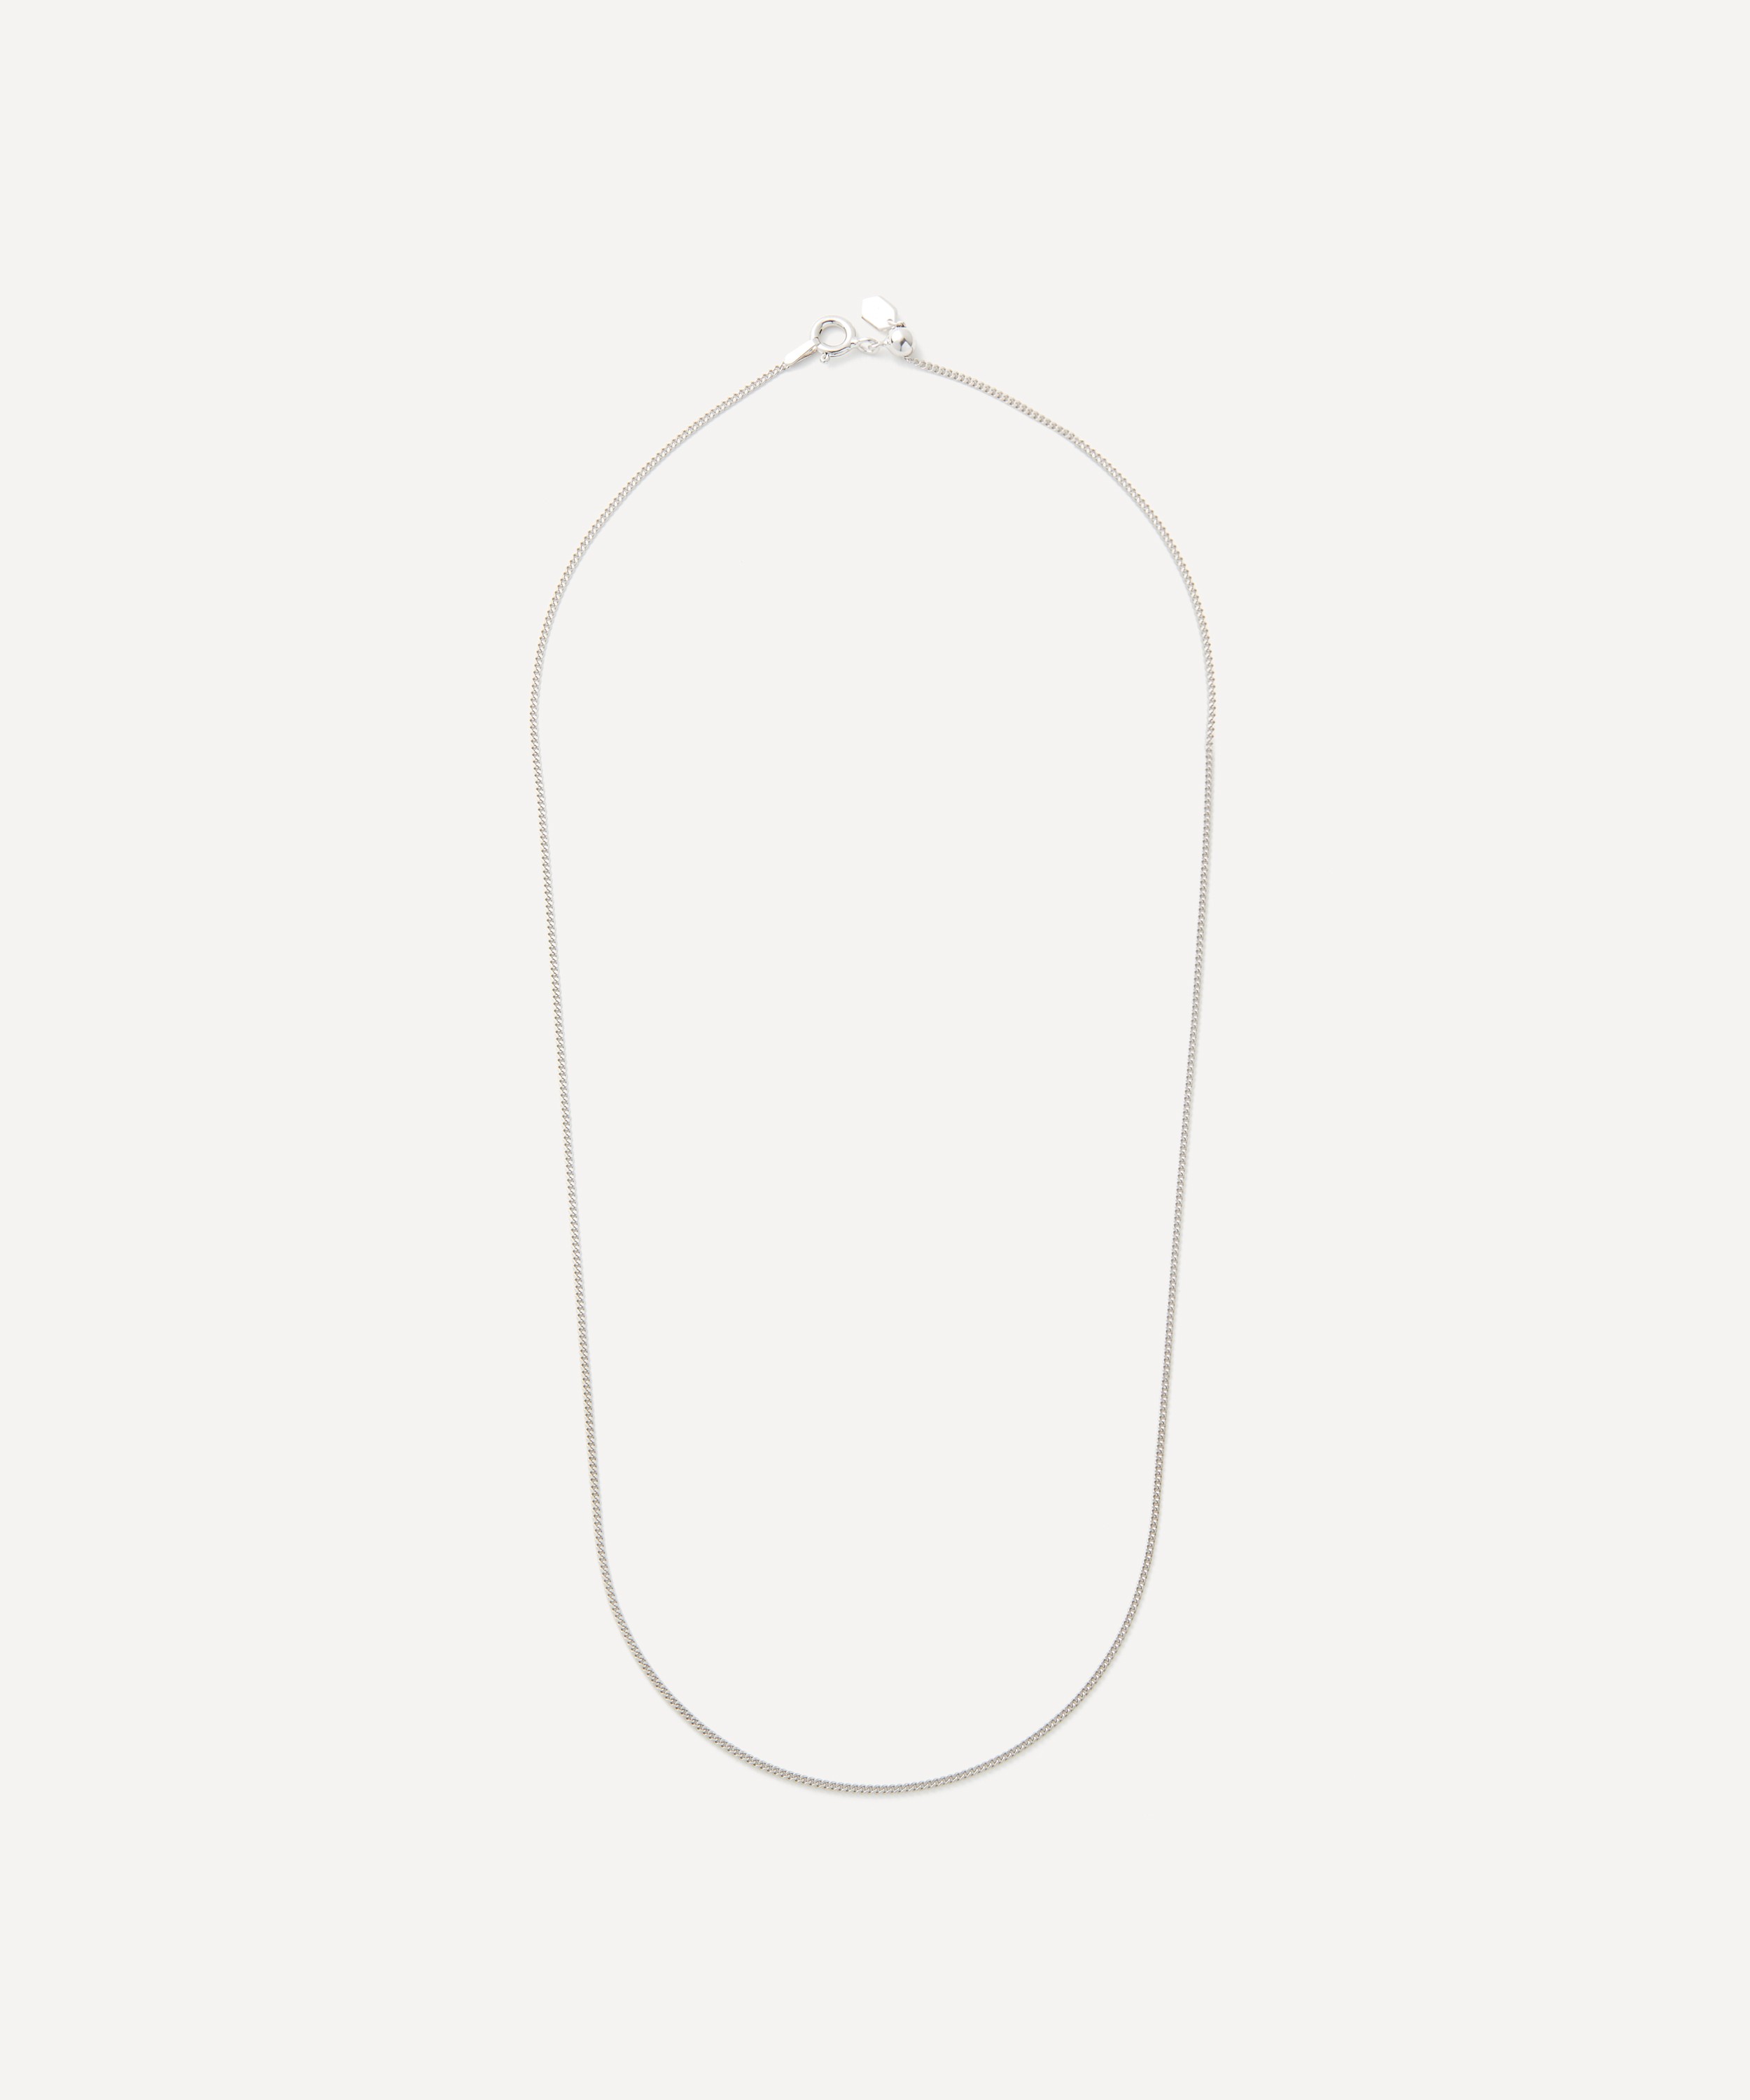 Maria Black - White Rhodium-Plated Nyhavn Chain Necklace